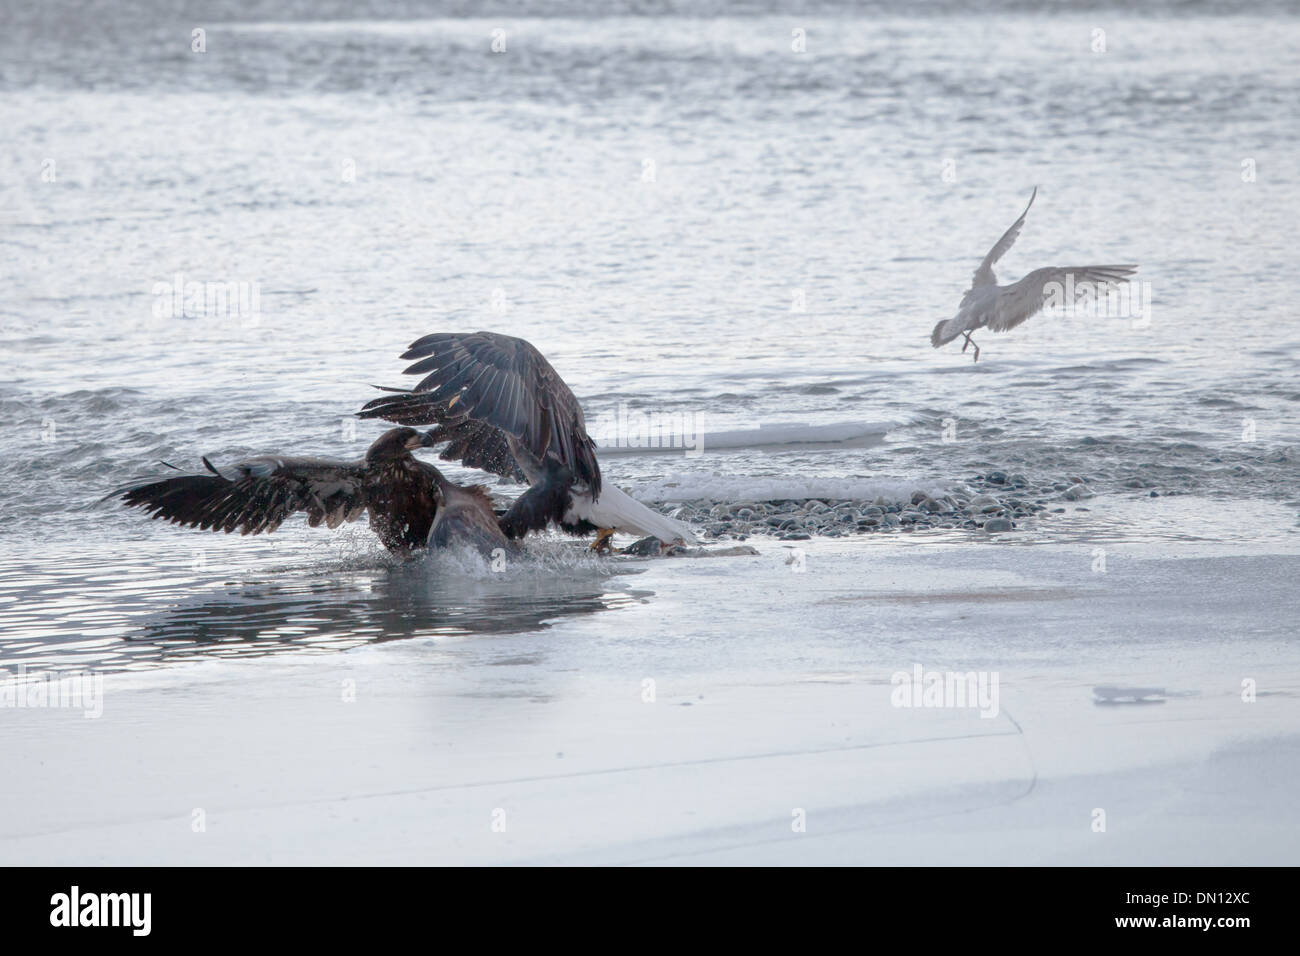 Eagles at the Chilkat Bald Eagle Preserve near Haines Alaska fighting over a salmon in winter. Stock Photo